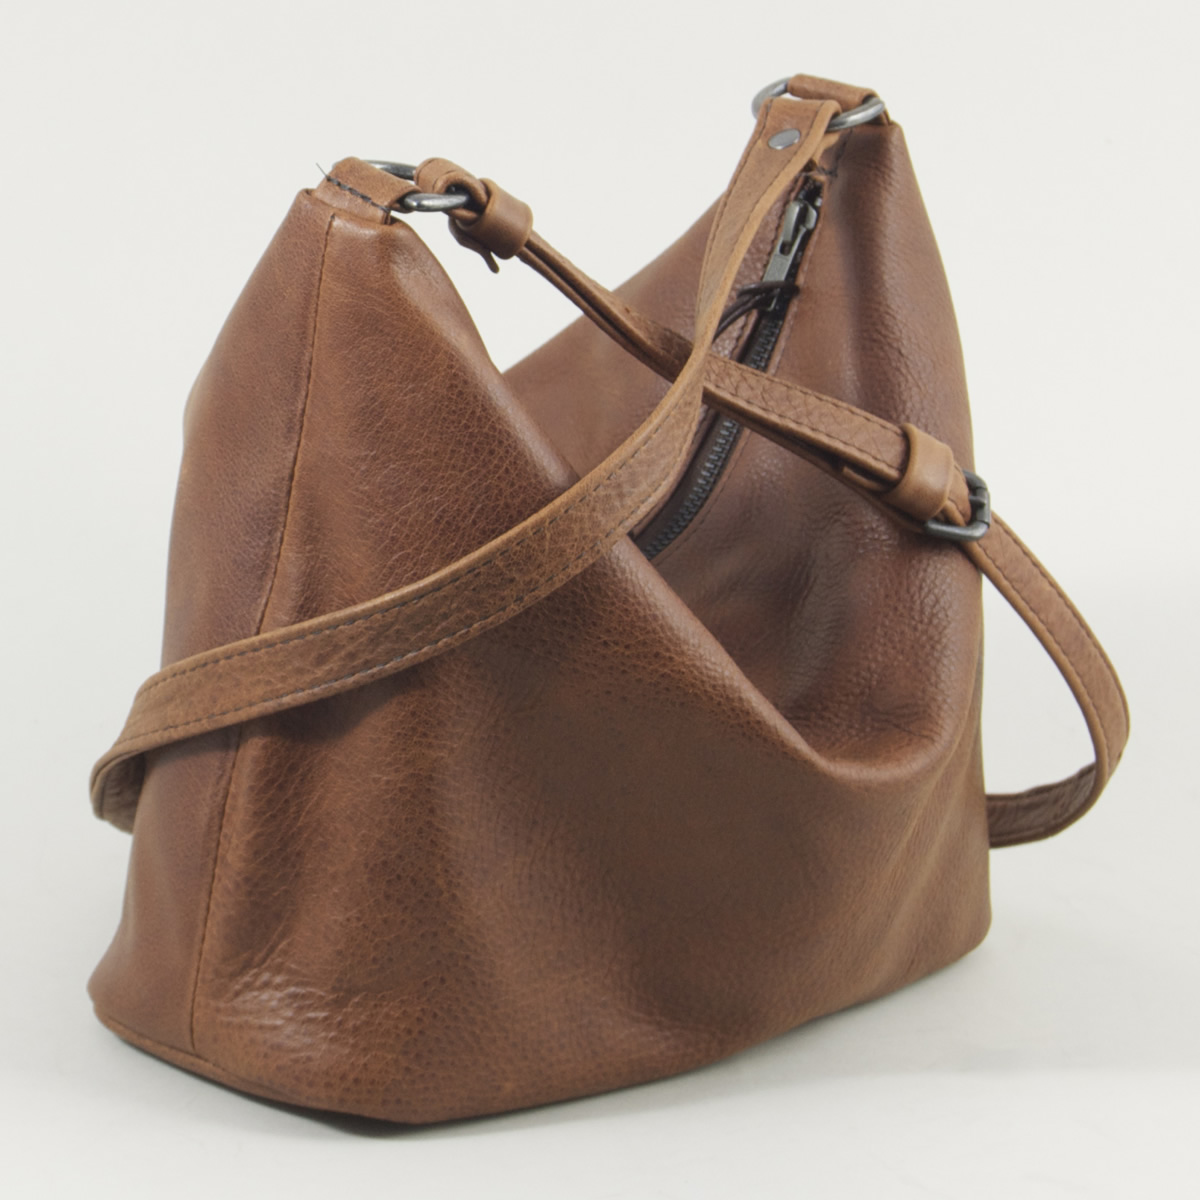 soft leather bags online